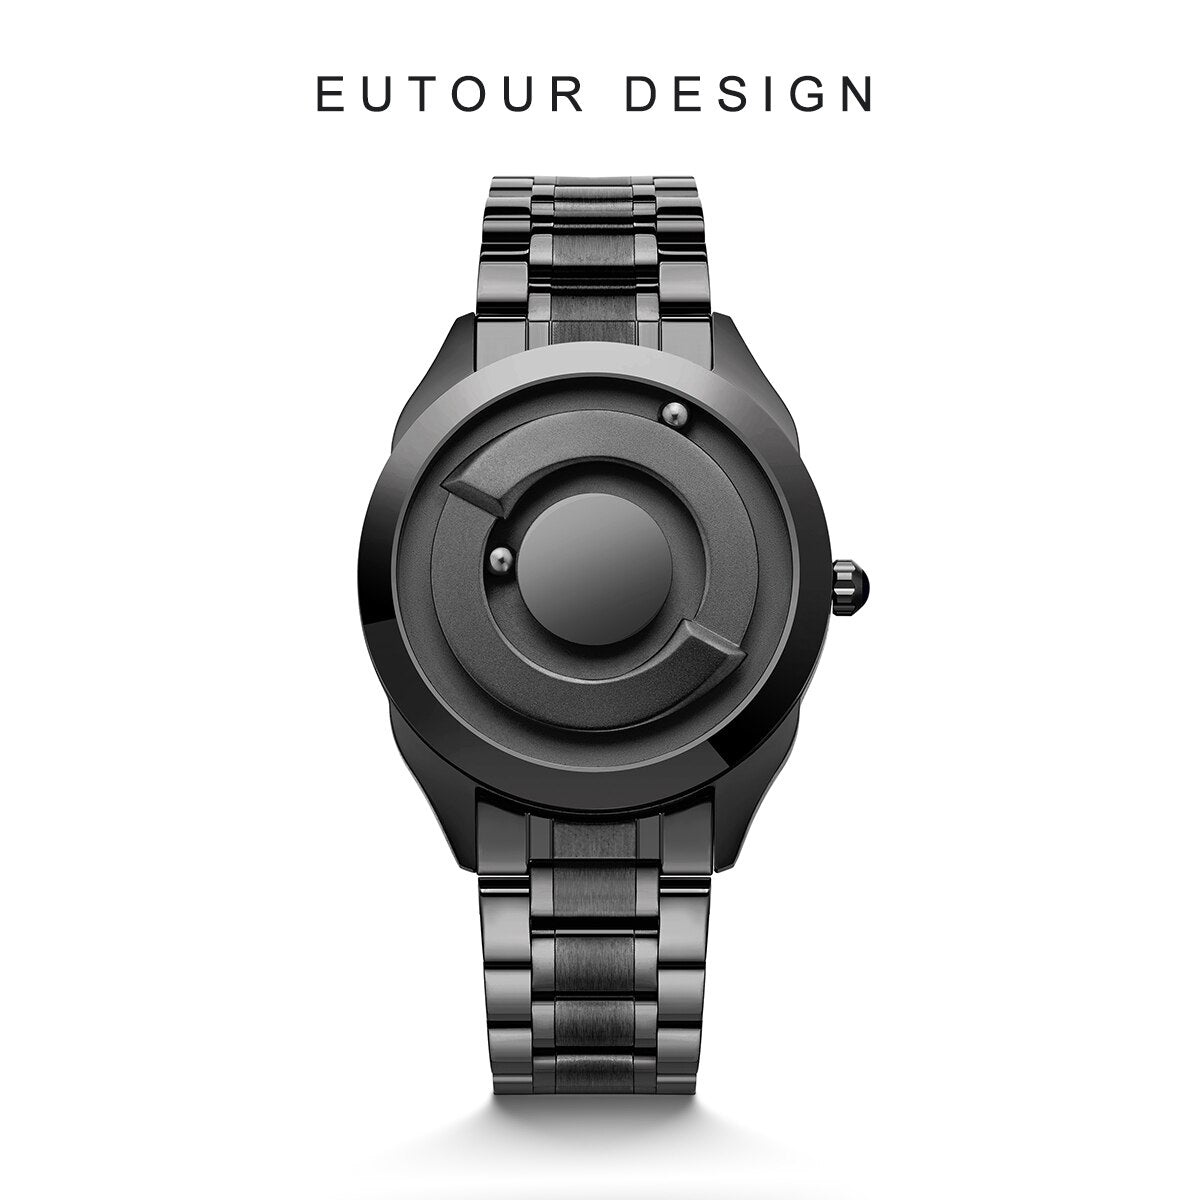 EUTOUR Magnetic Beads Men's Personality Creation Sports Watch Cool Concept Borderless Fashion Design Watch-Stainless Steel Strap